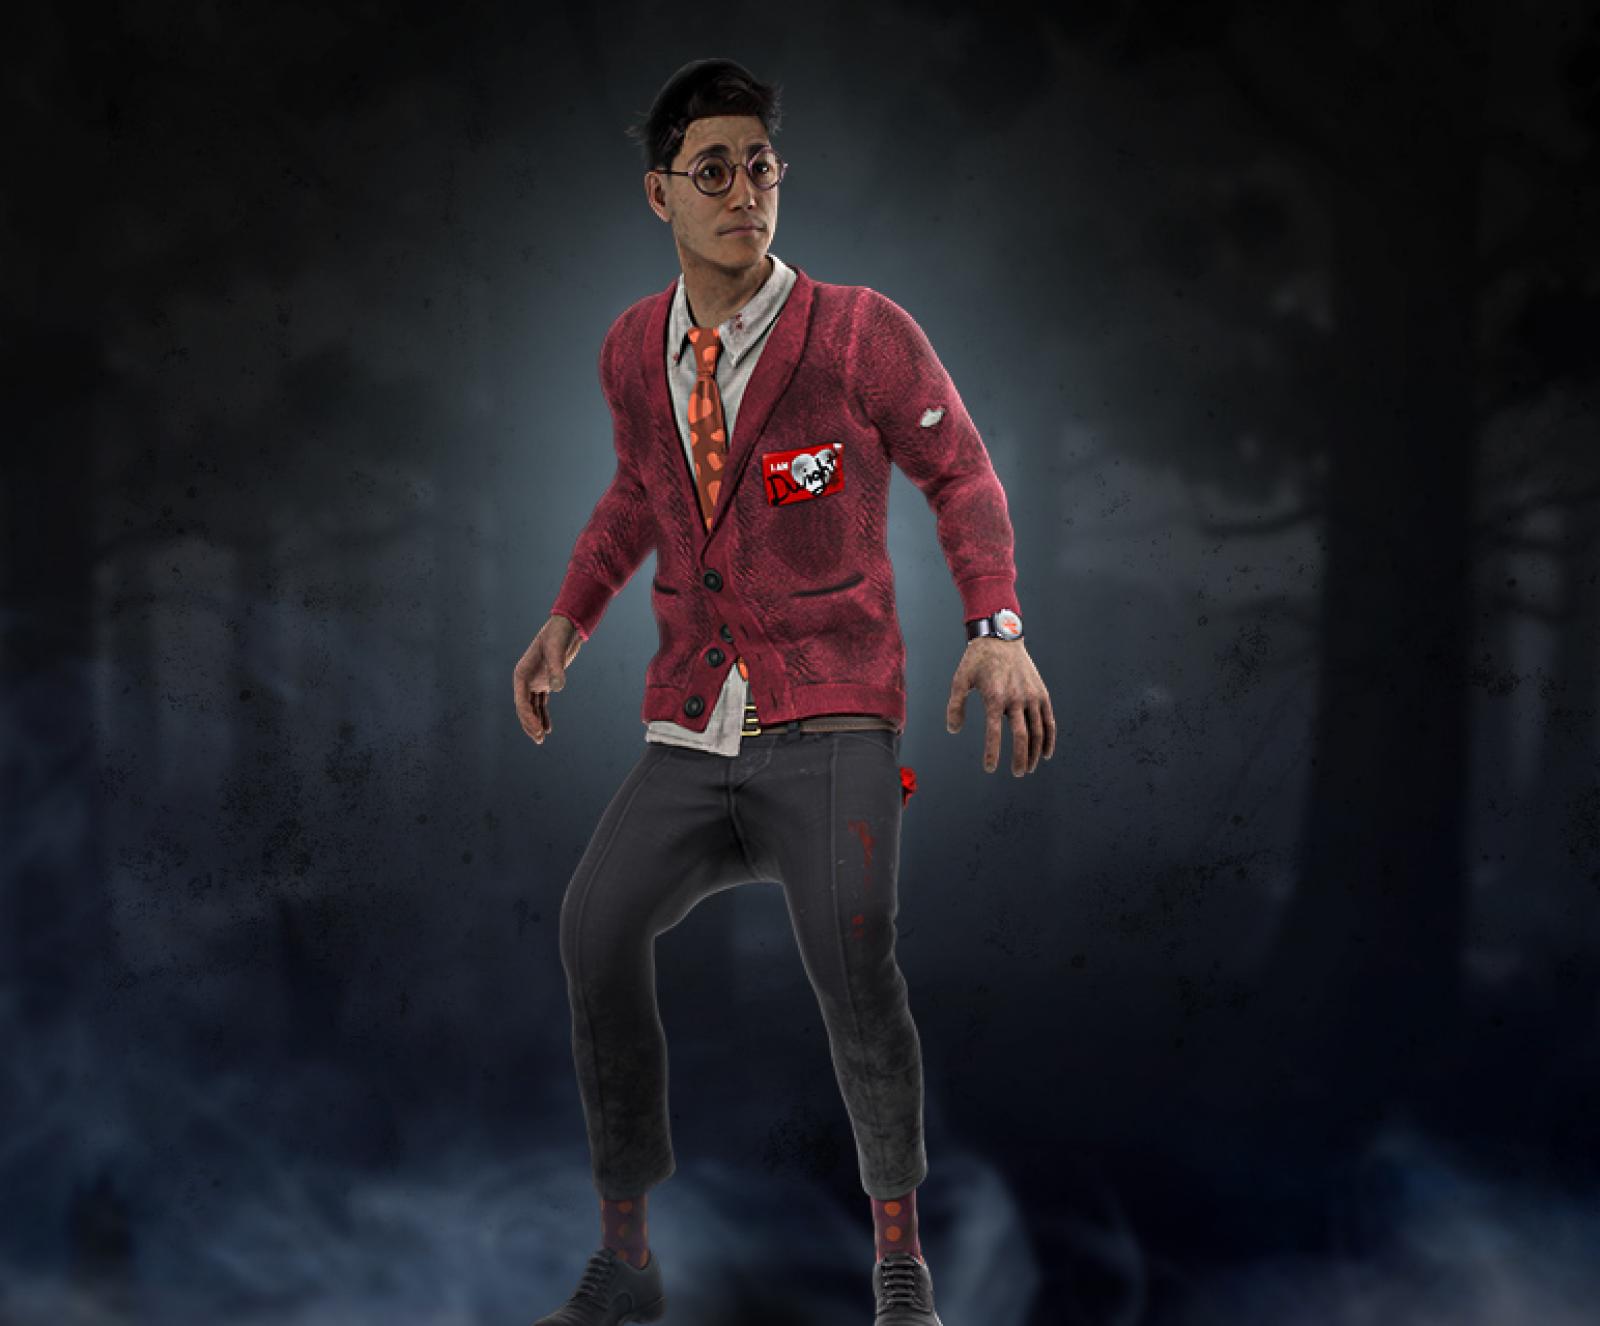 Dead by Daylight All Active Codes + Obtainable Cosmetics & Rewards - OBTAINABLE COSMETICS - E695D73